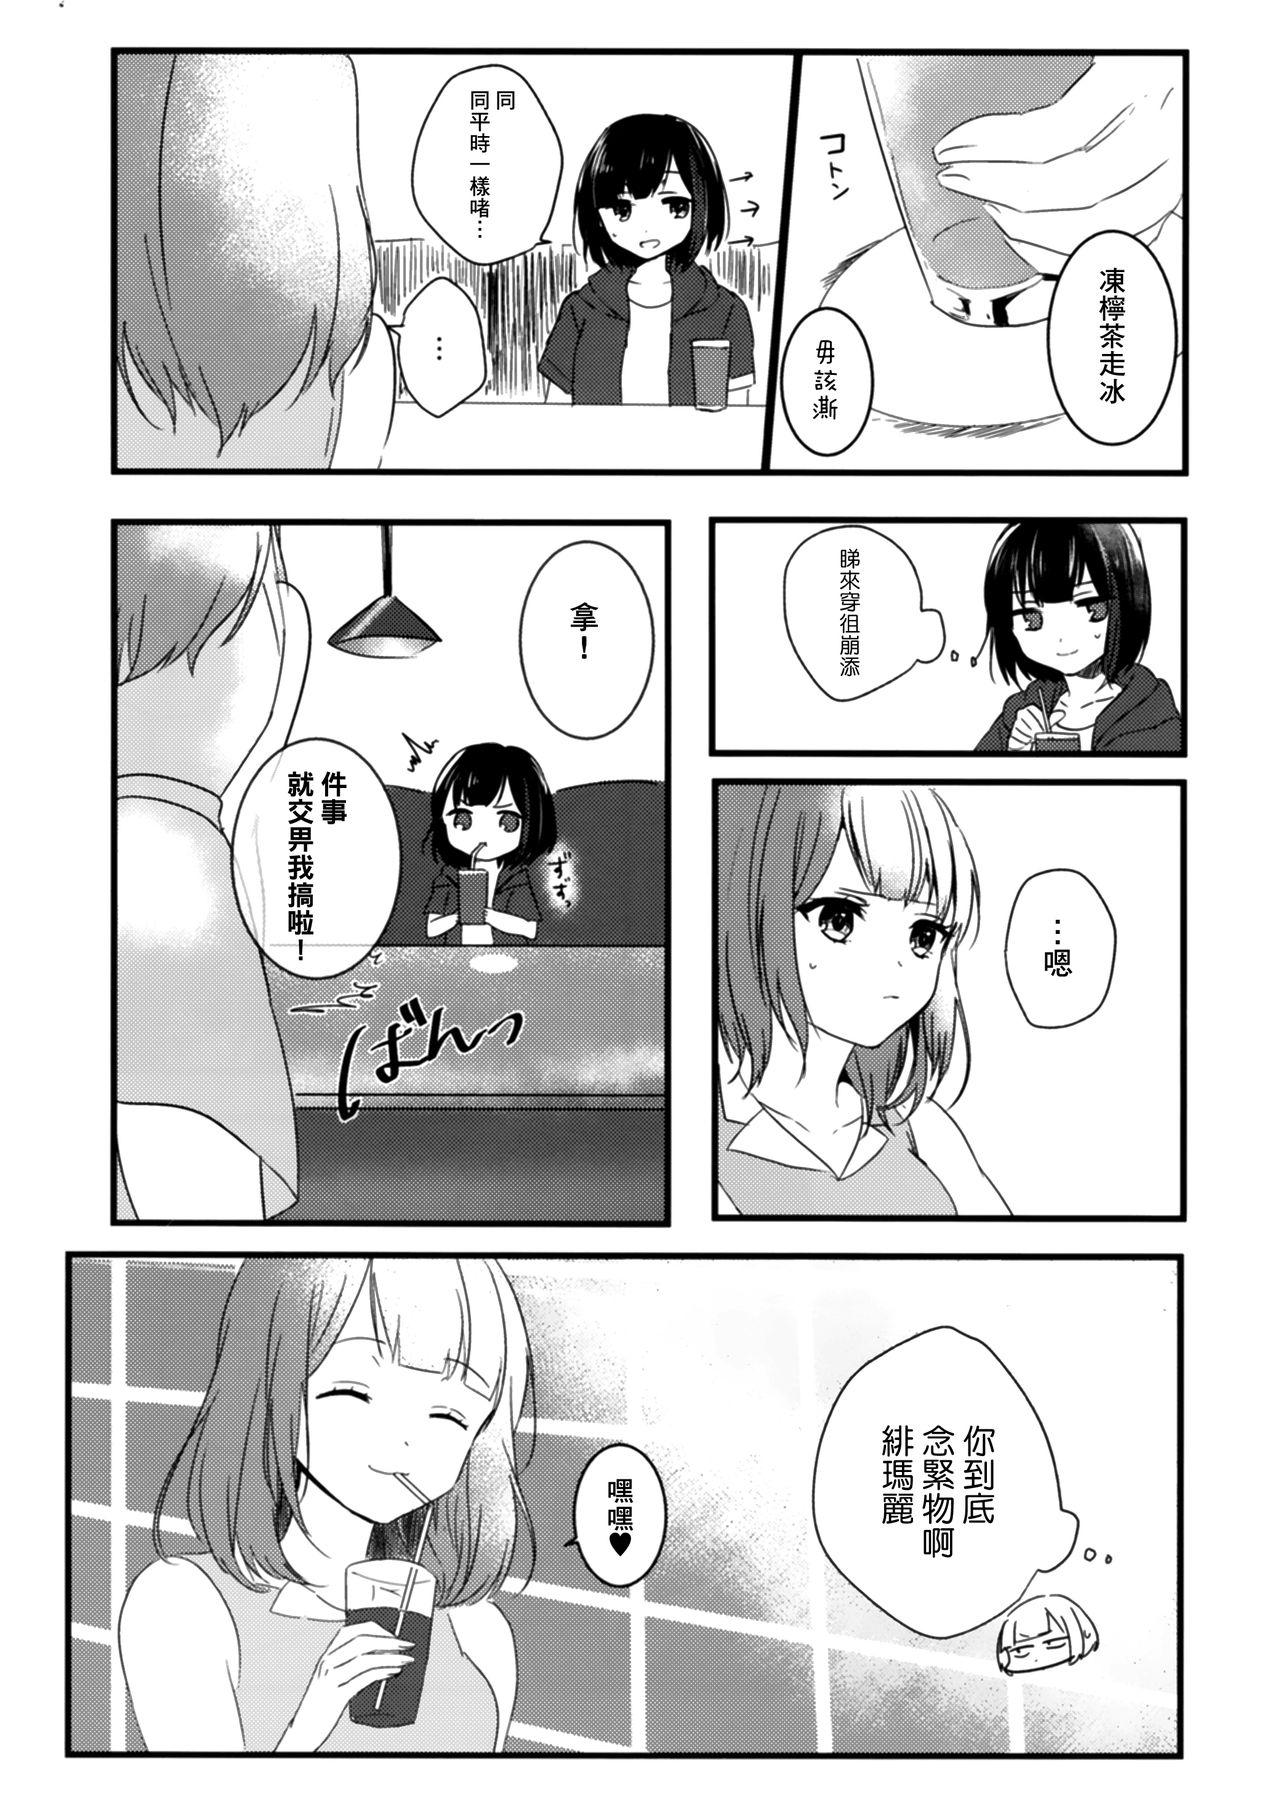 Cosplay Secret relationship - Bang dream Hot Teen - Page 8